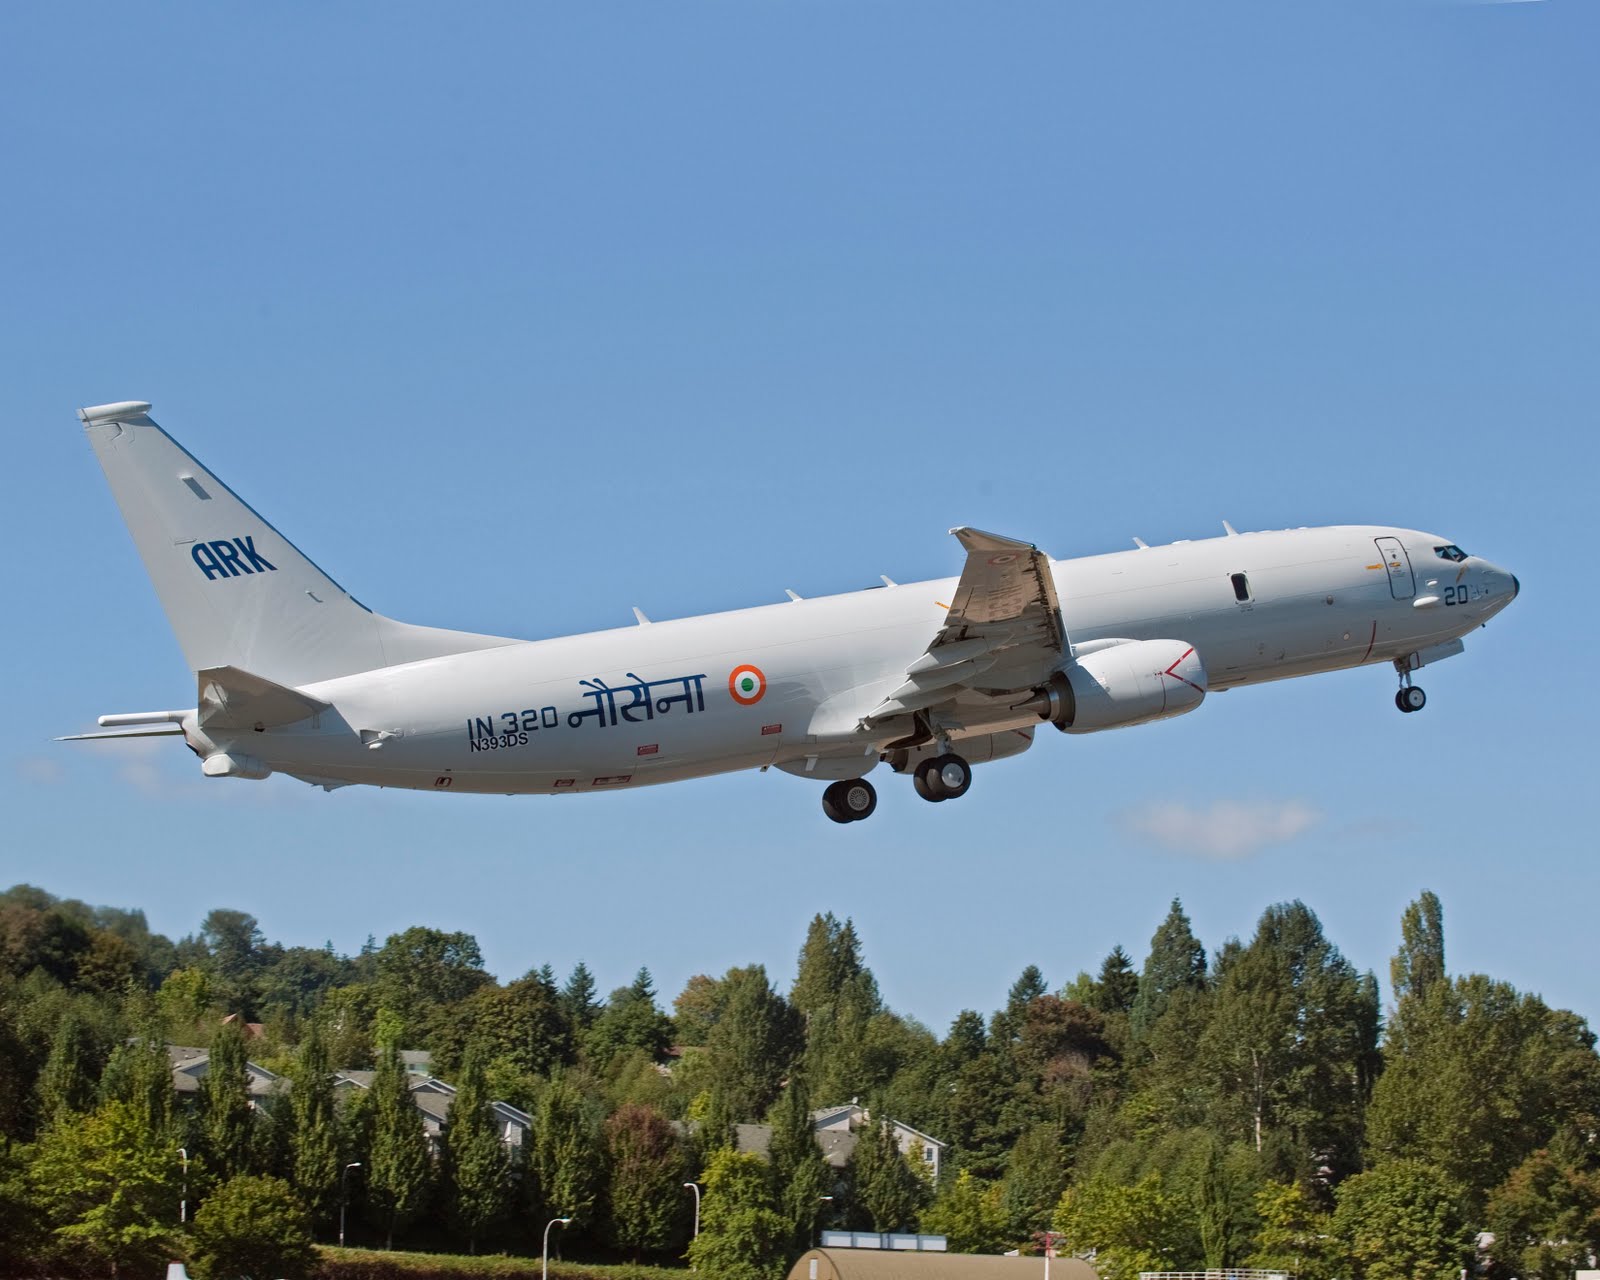 The first P-8I aircraft for the Indian Navy completed its initial flight on September 28, taking off from Renton Field at 12:02 p.m. Pacific time and landing two hours and 31 minutes later at Boeing Field in Seattle.